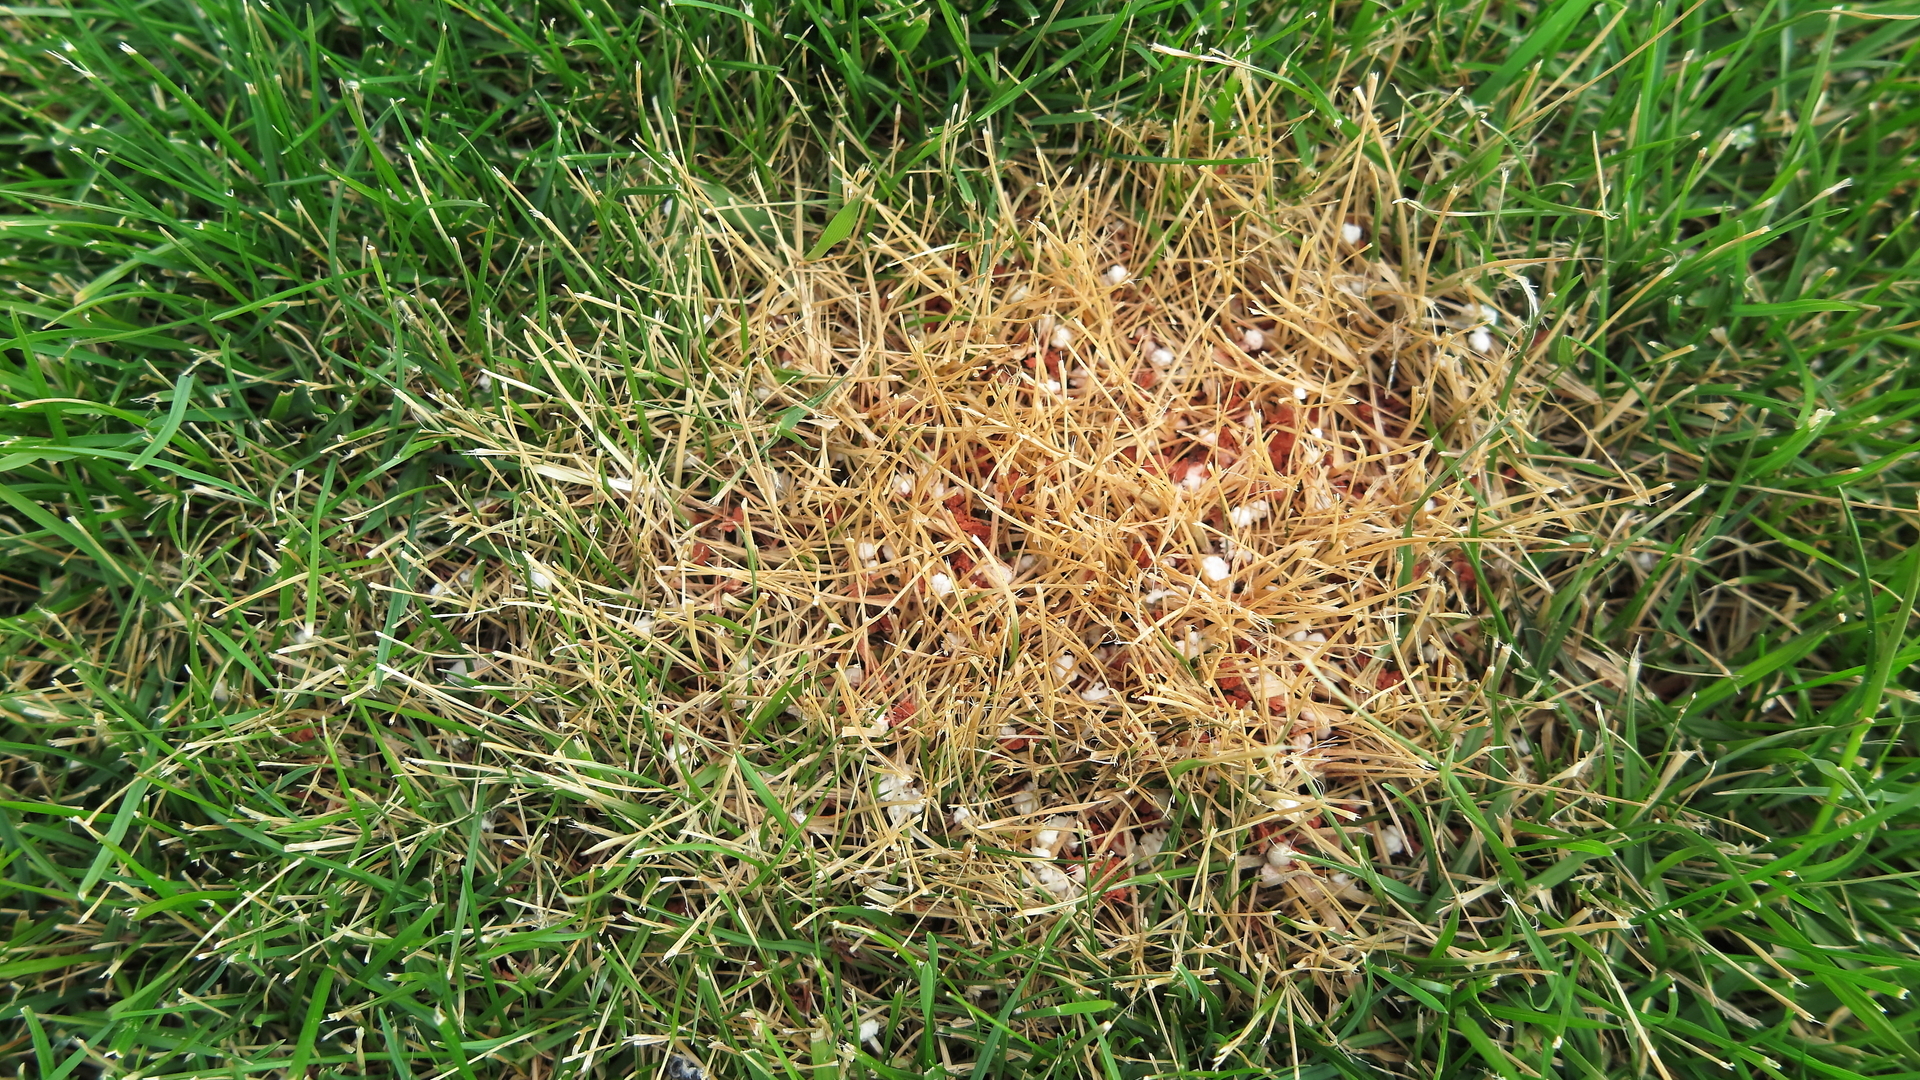 Signs That Indicate Your Lawn Has Likely Been Over-Fertilized